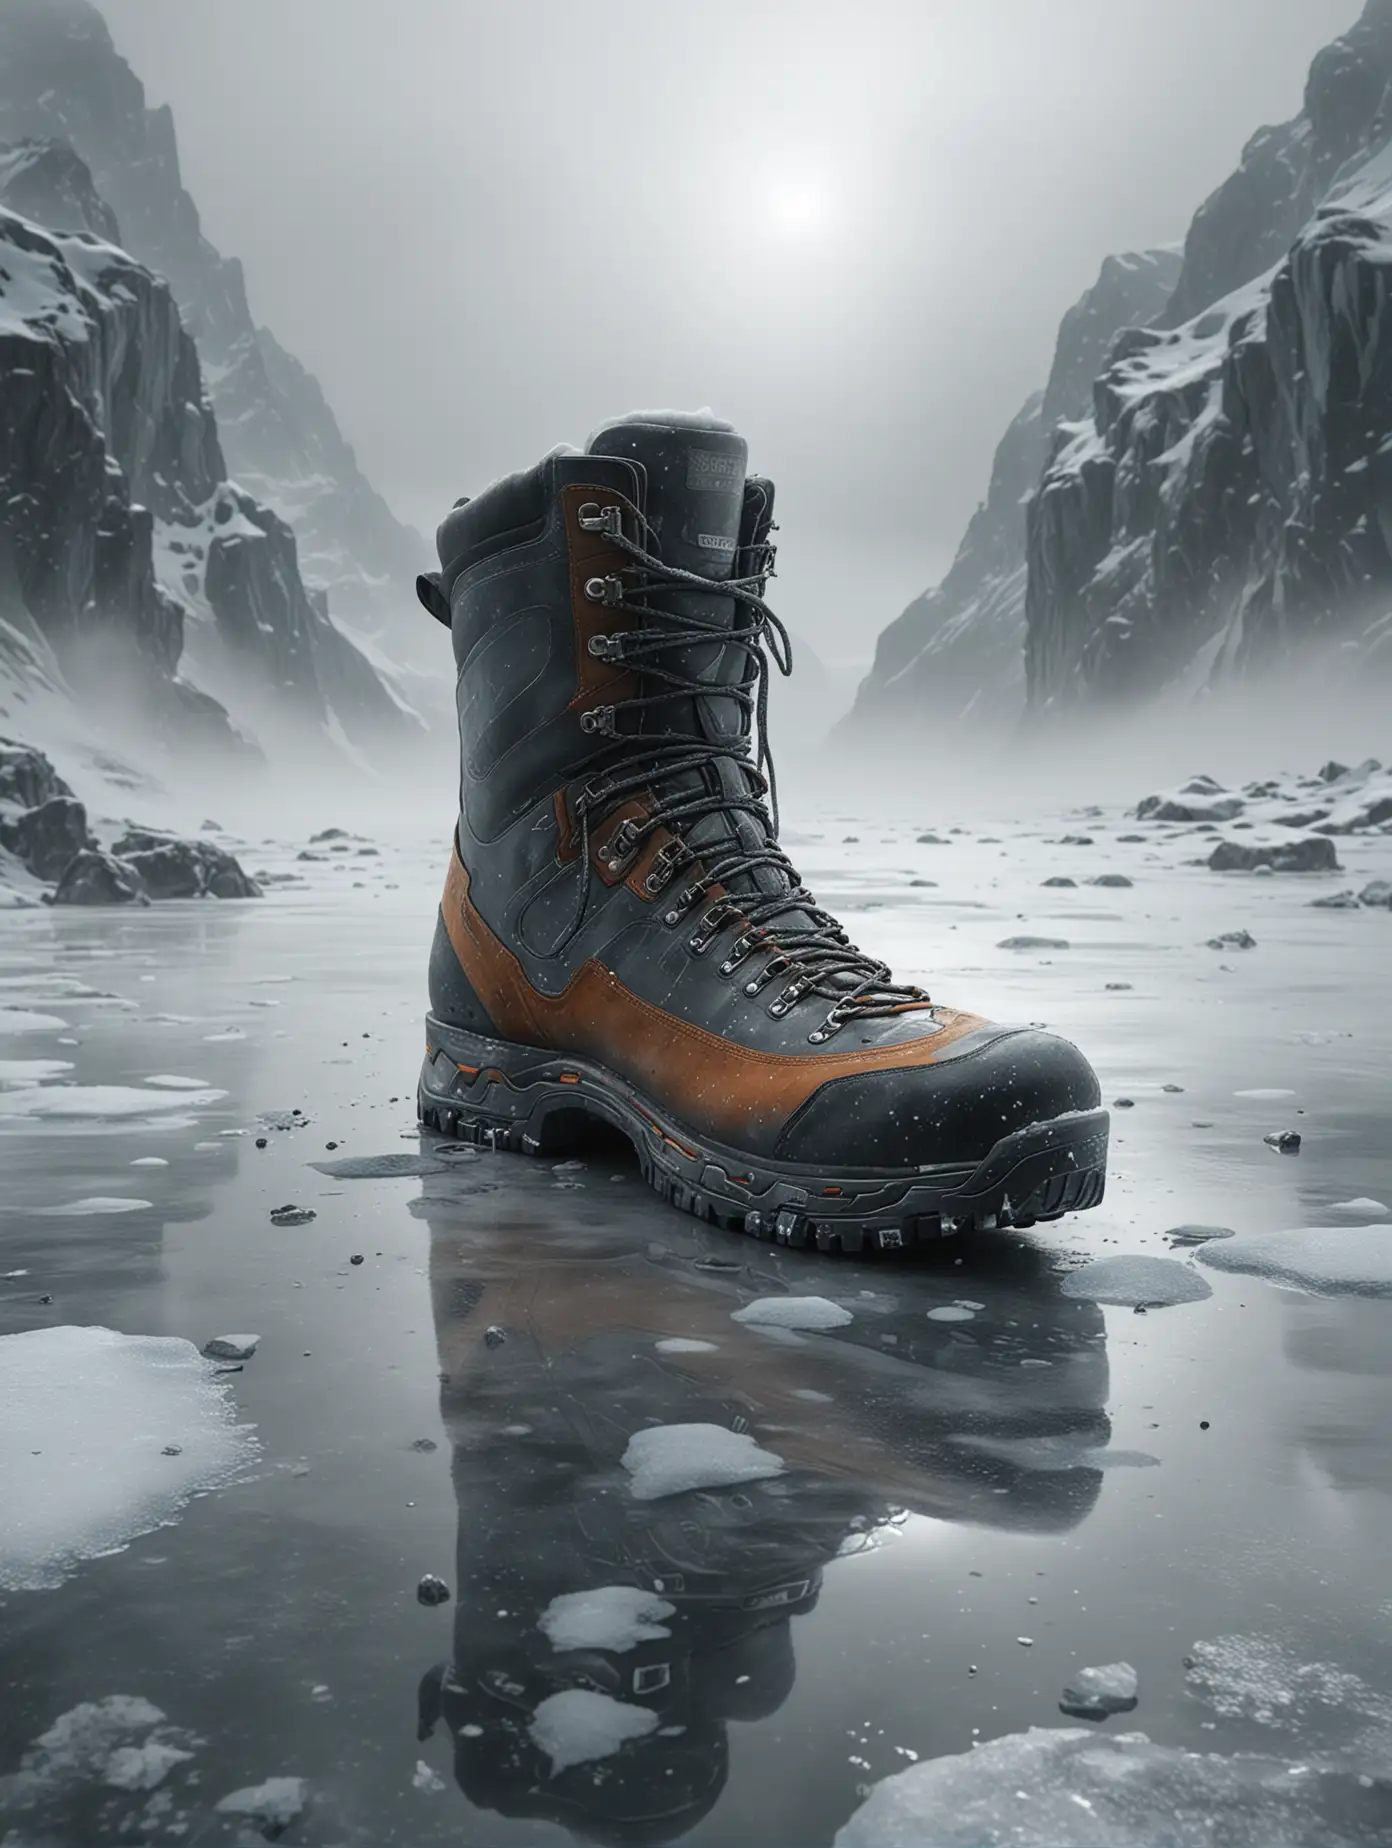 ultra realistic high futurestic boot, standing on foggy ice landscape